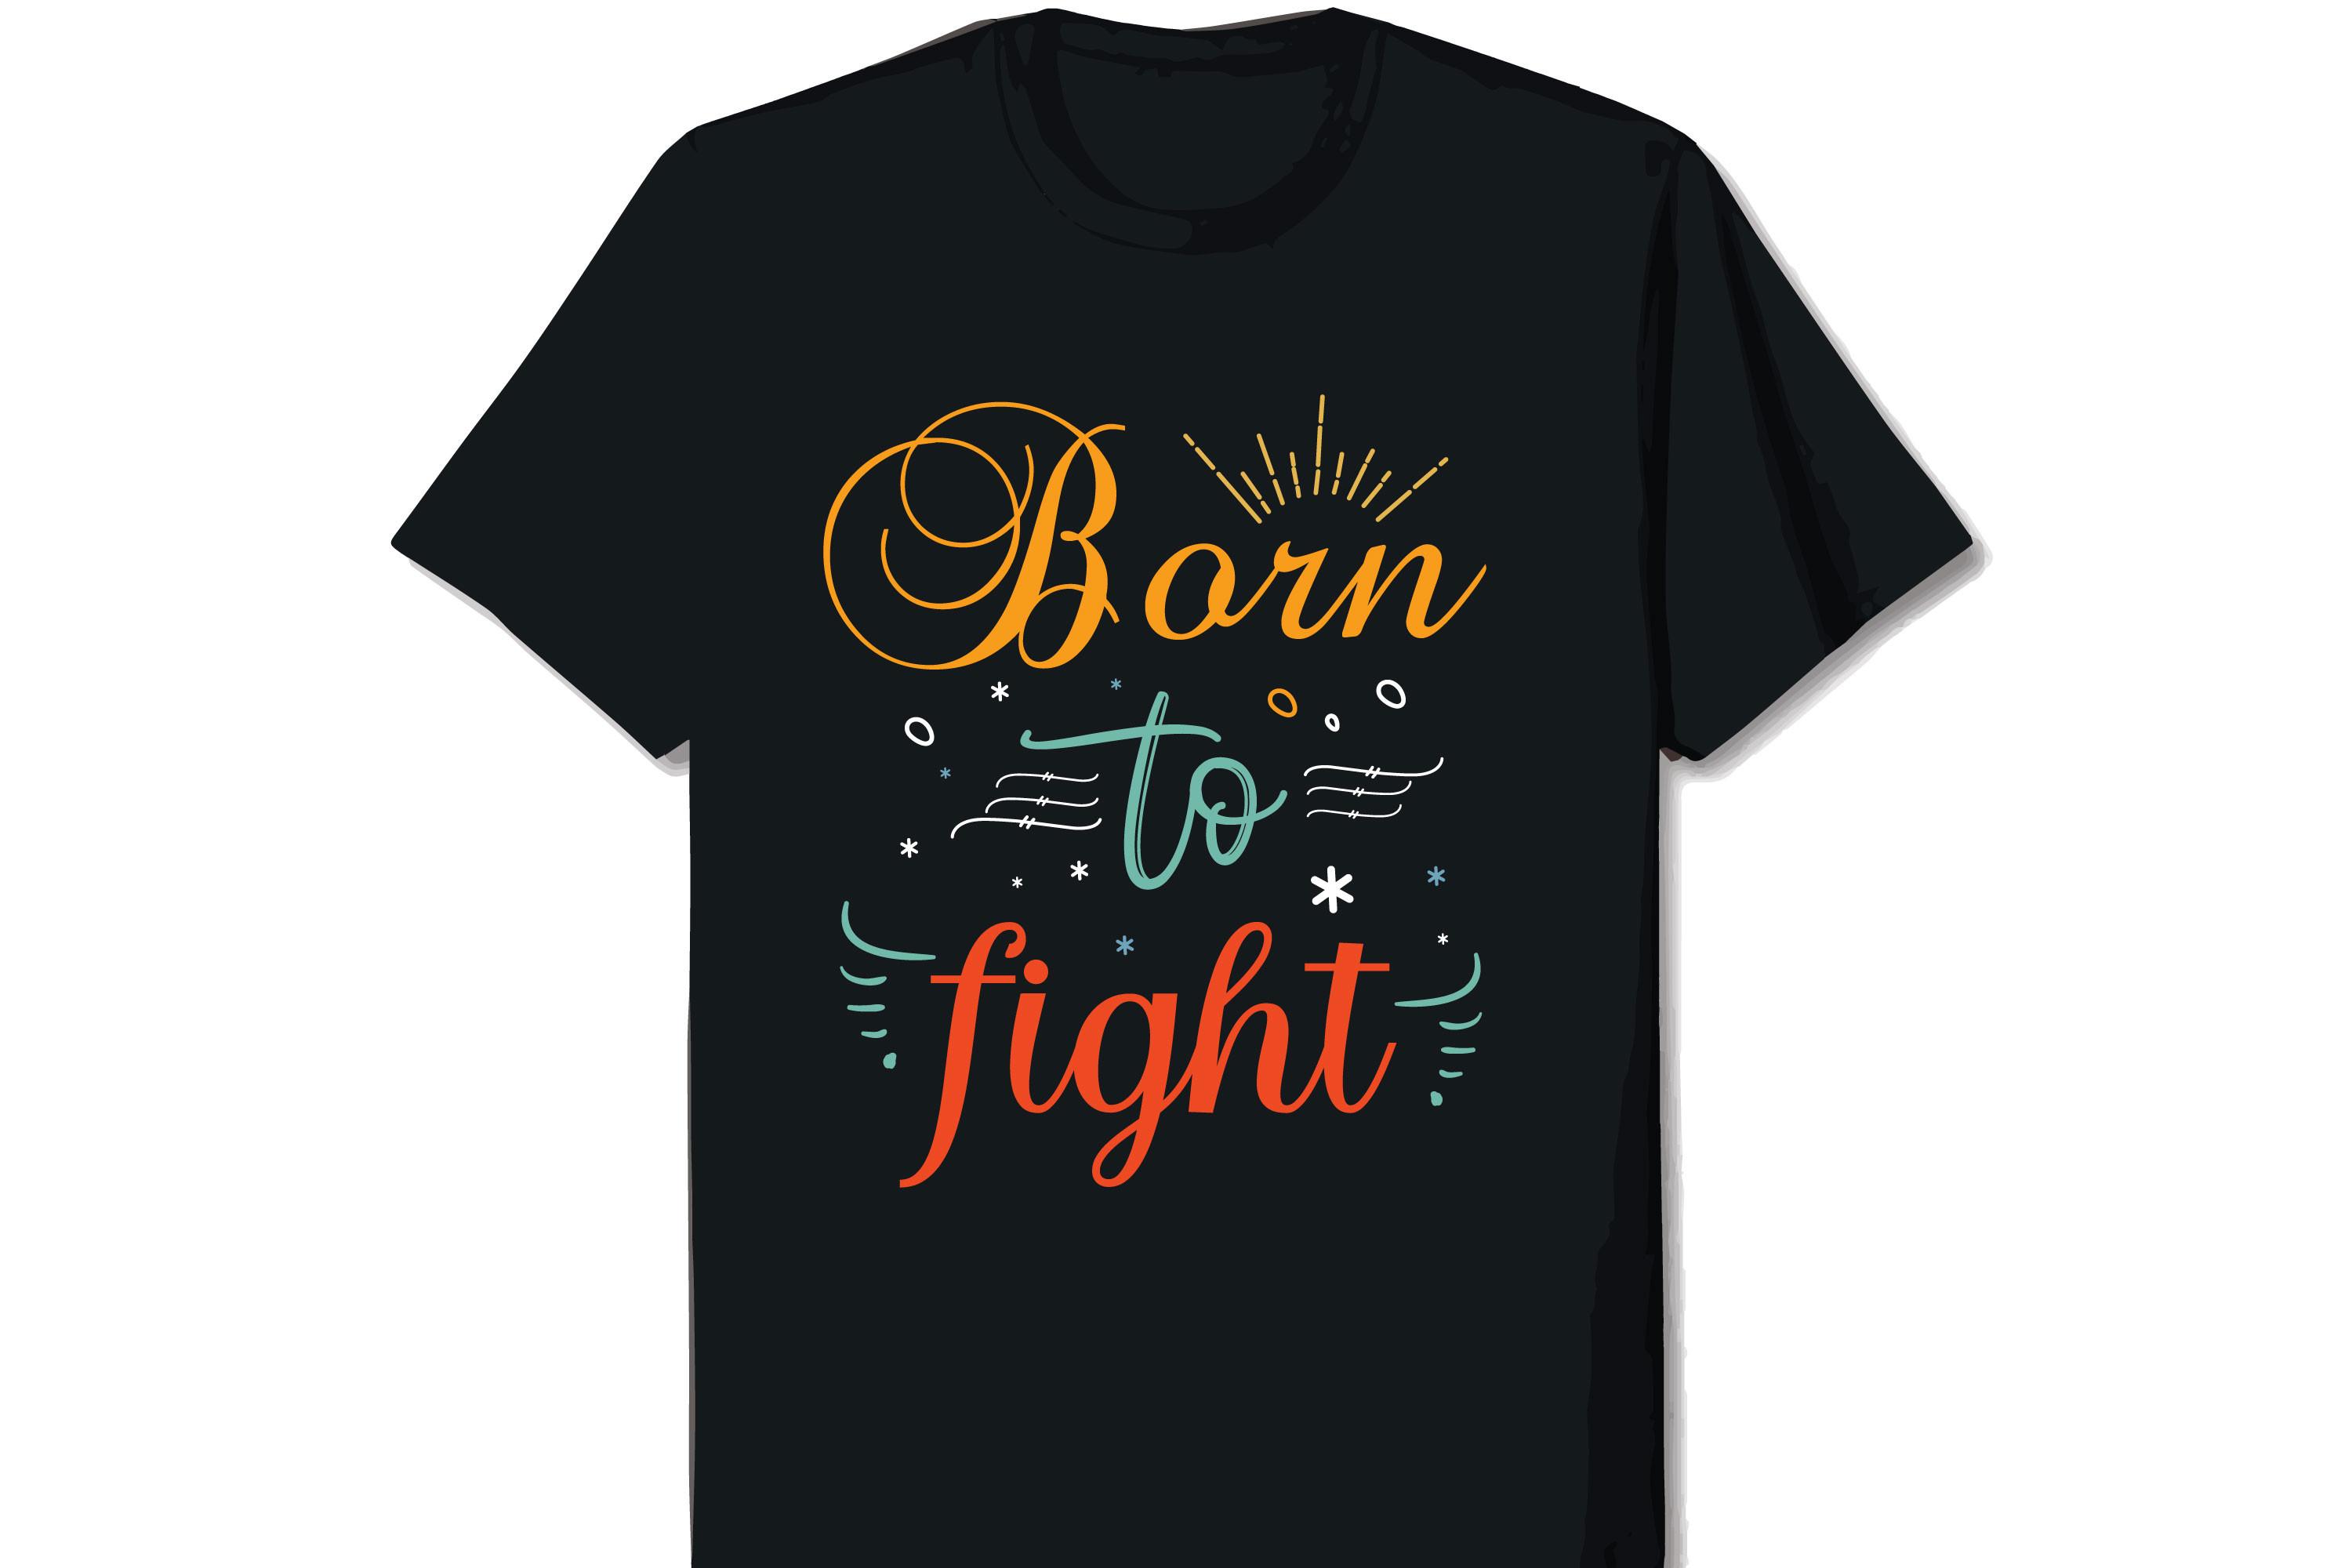 Born to Fight Typography T-shirt Design